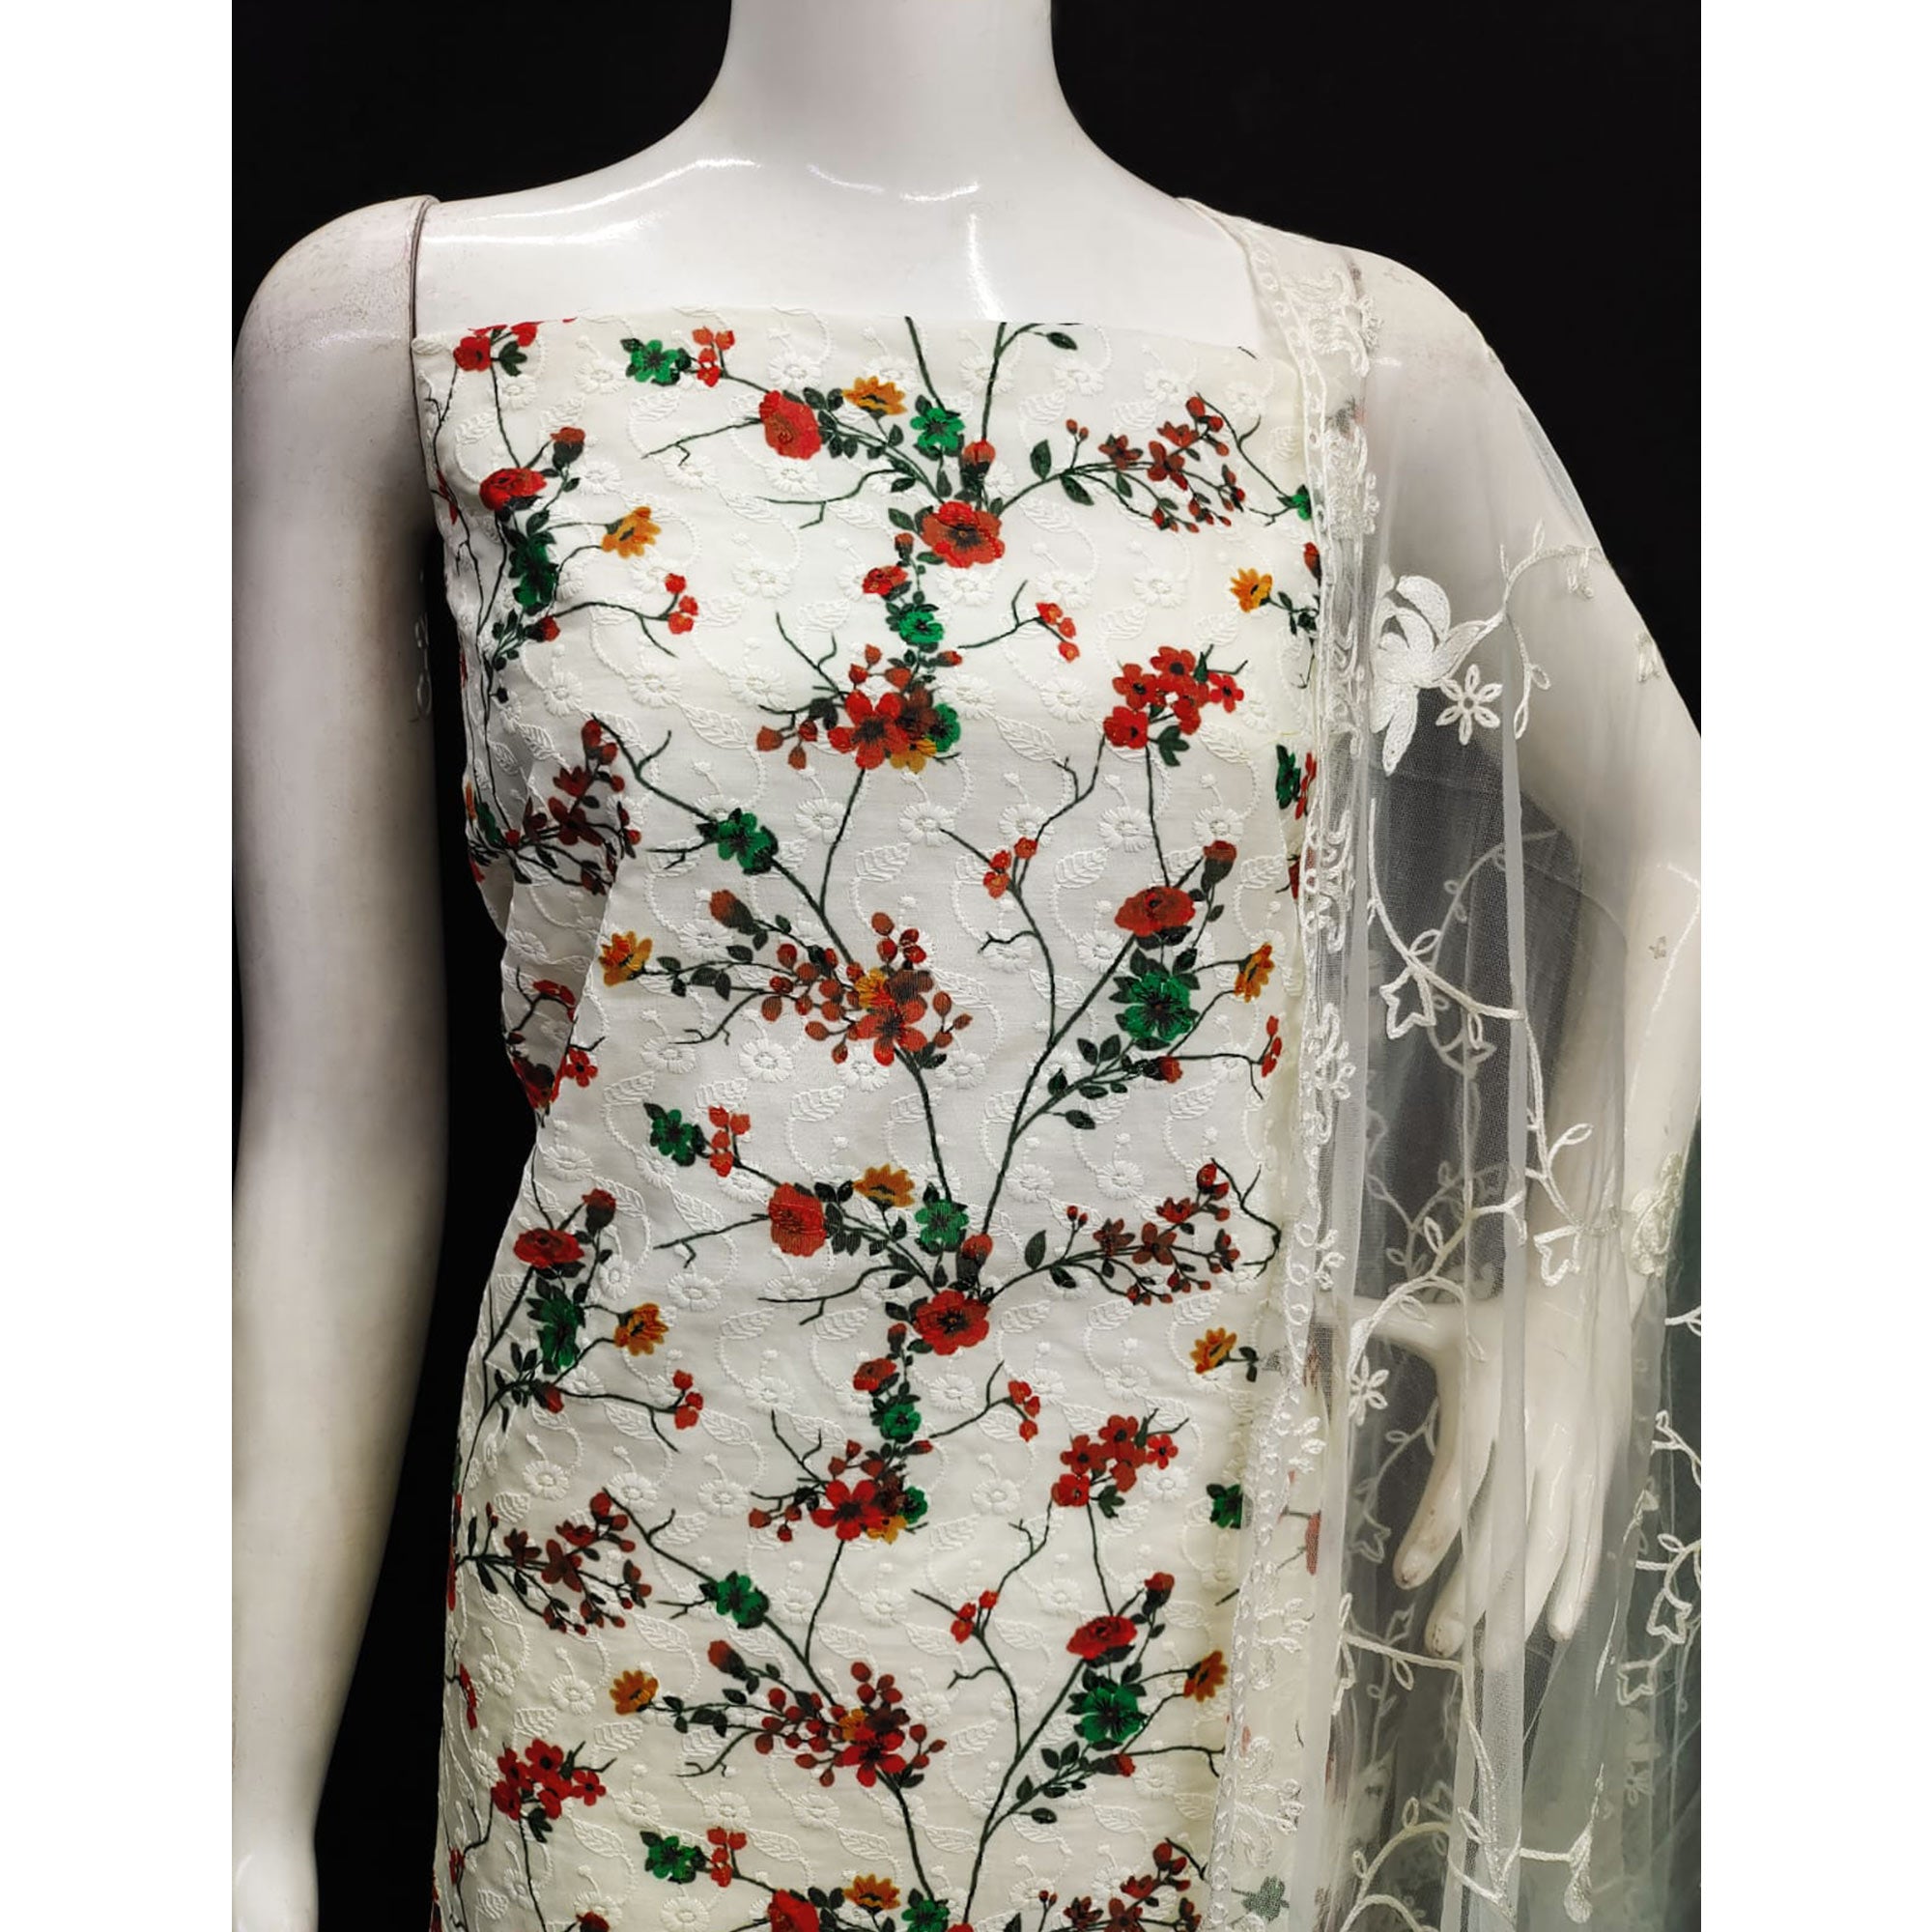 Off White Lucknowi With Embroidered Cotton Blend Dress Material